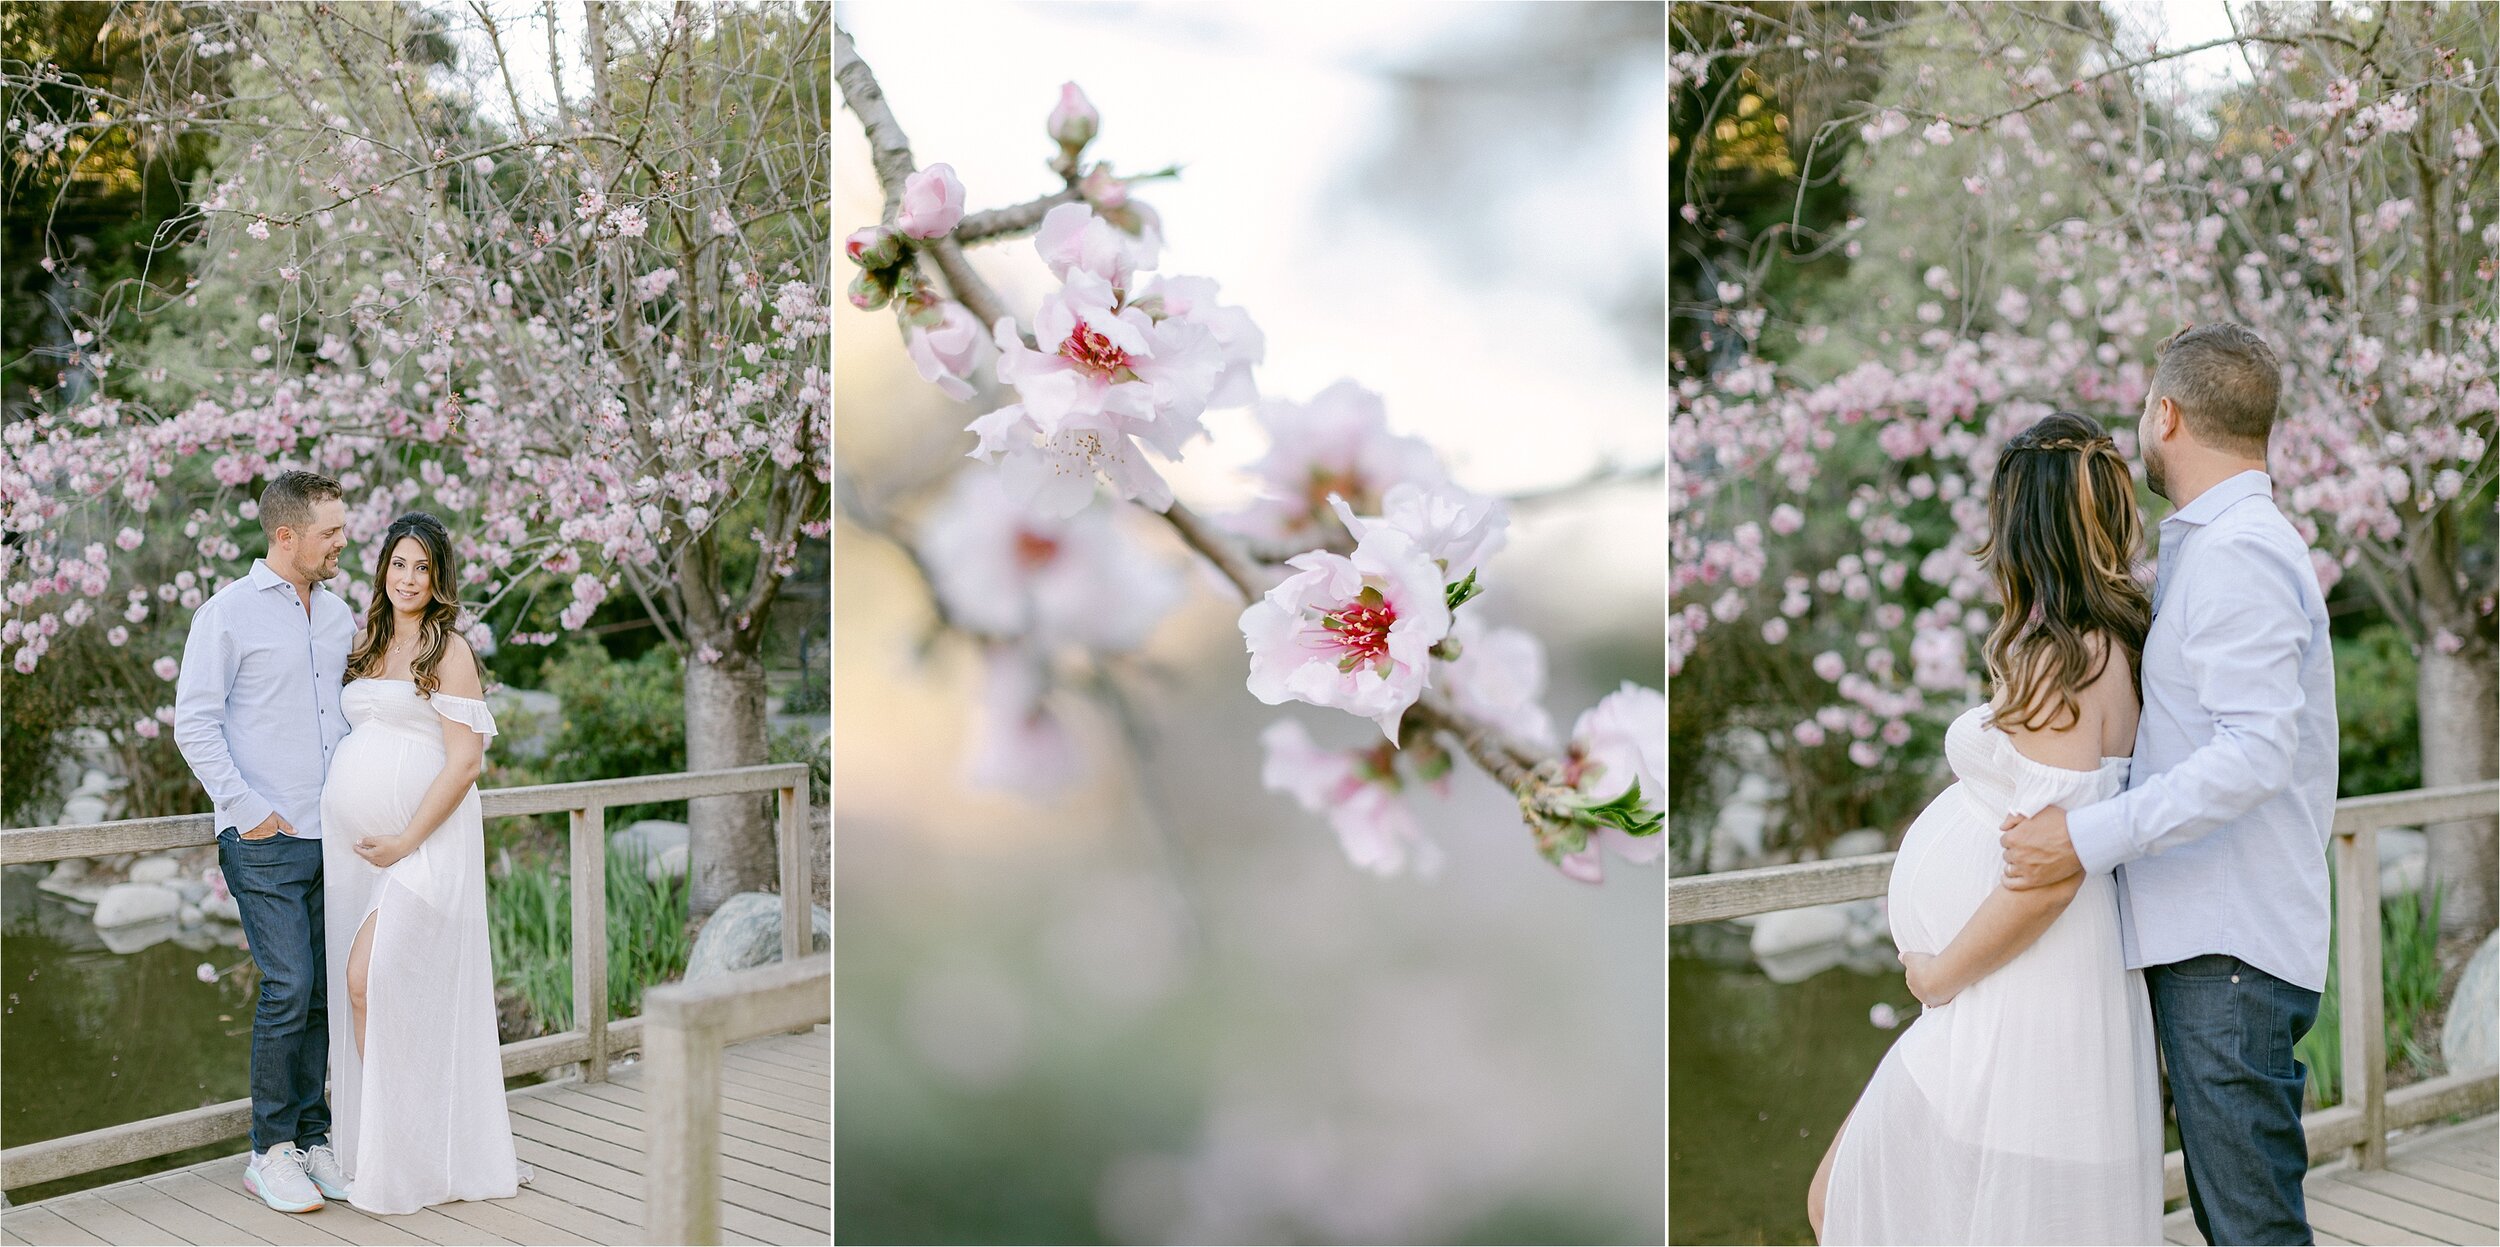 Husband and wife embrace under cherry blossom trees during their Los Angeles maternity photo shoot